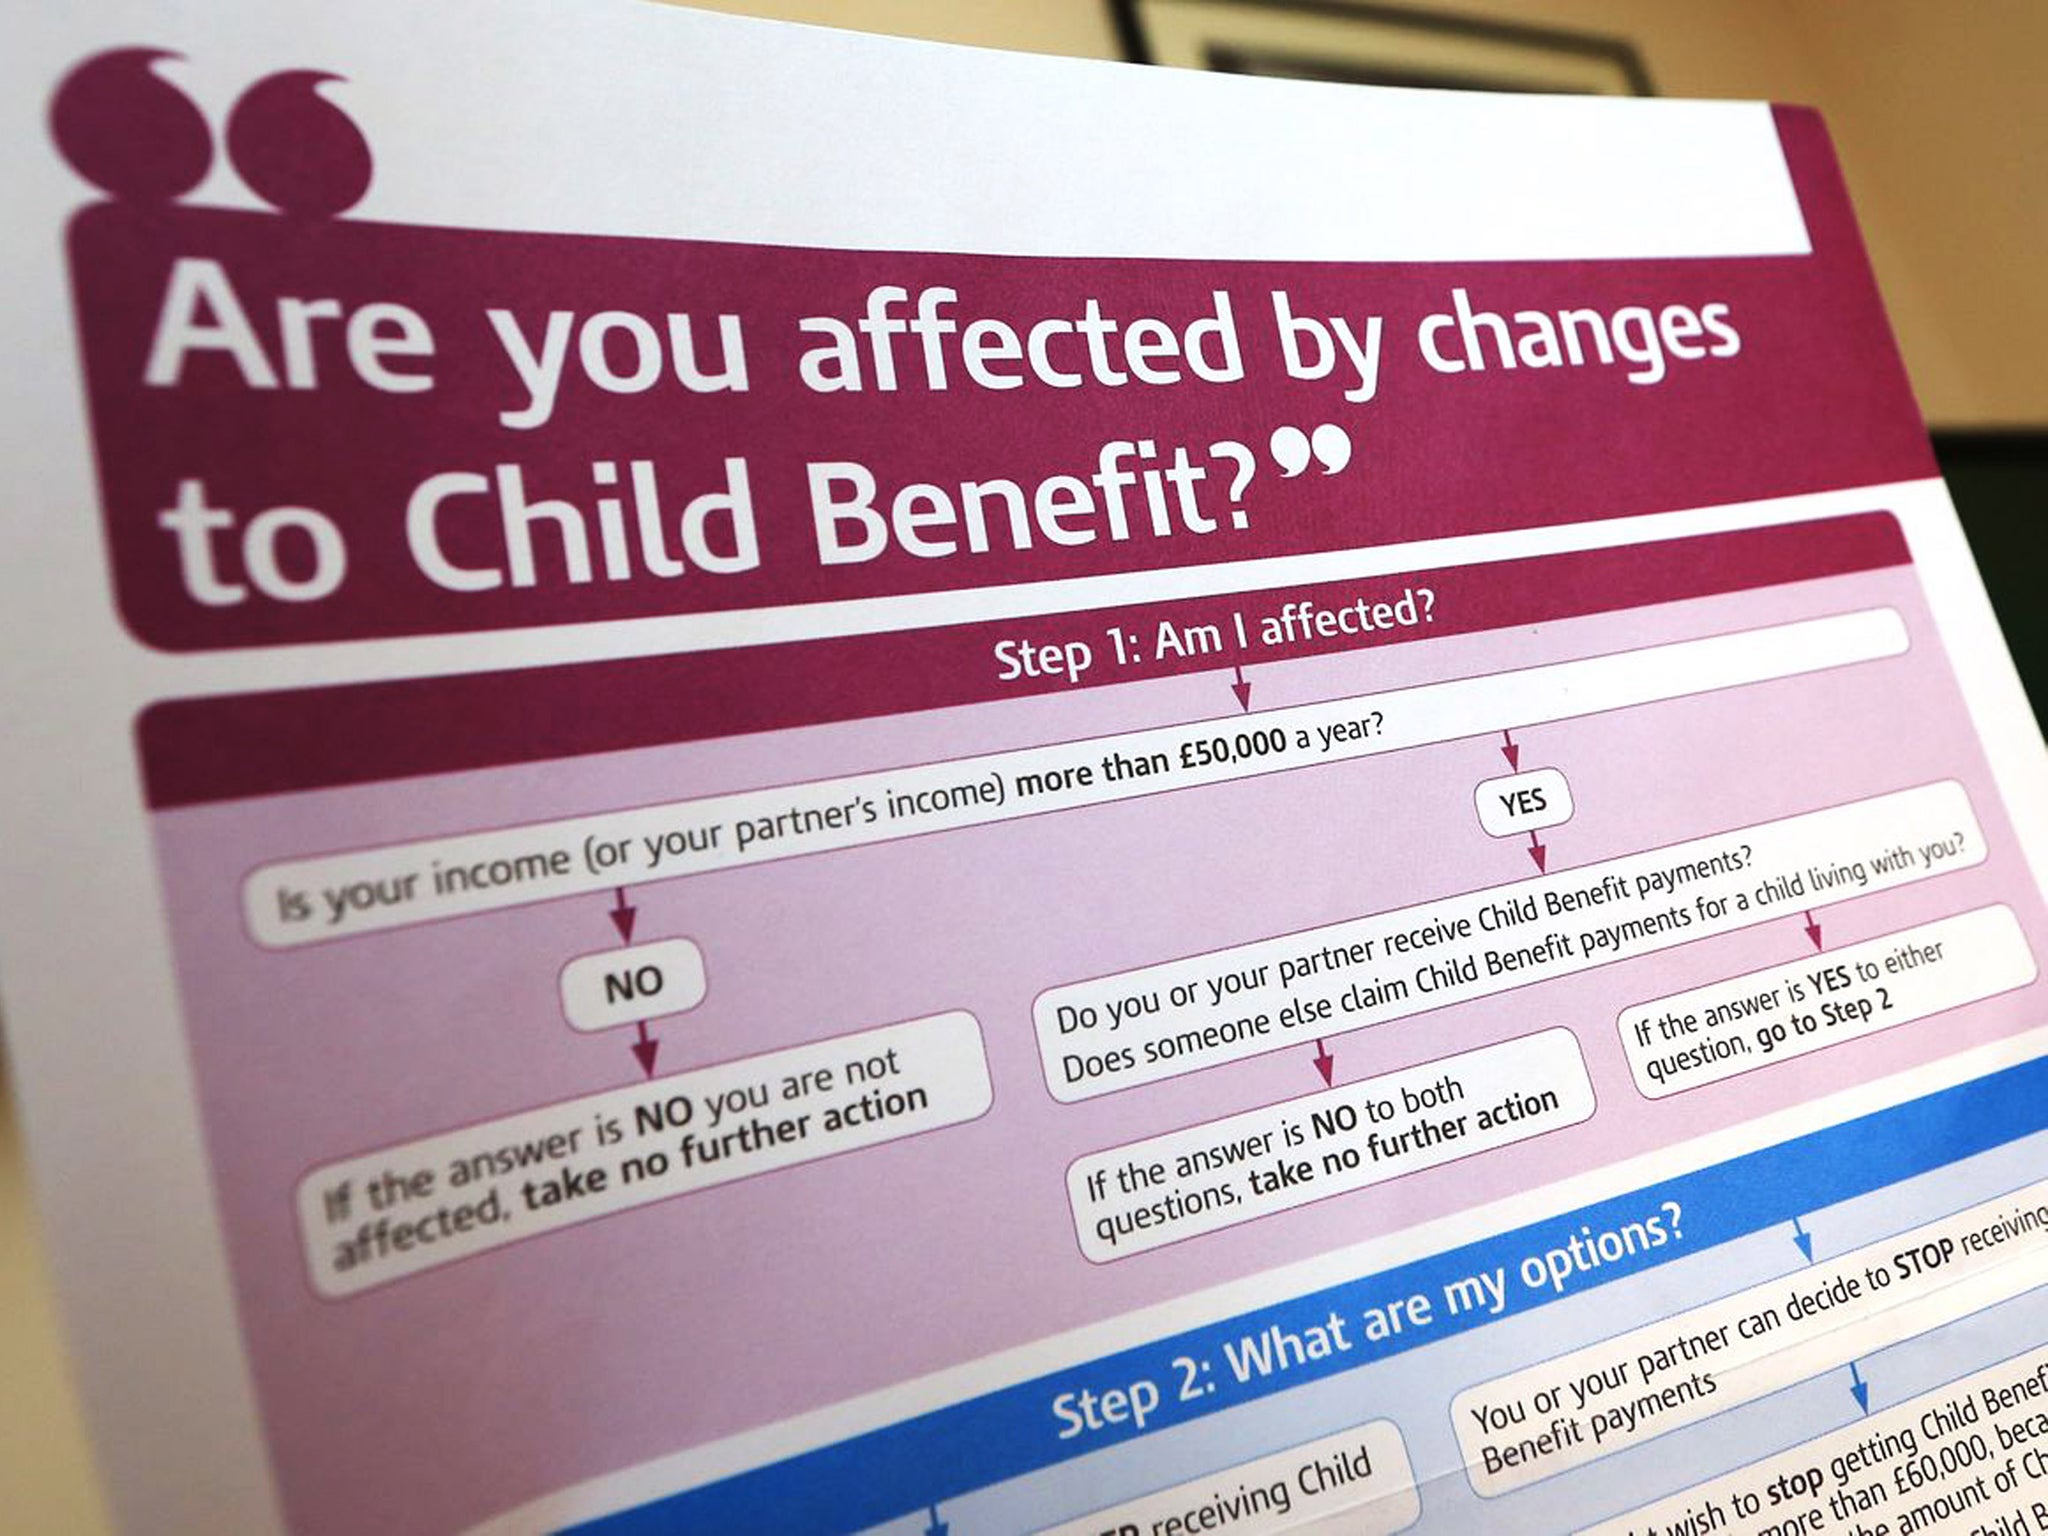 George Osborne will have to abolish child benefit for over four million families to meet his commitment to cut welfare spending by £12bn in 2018